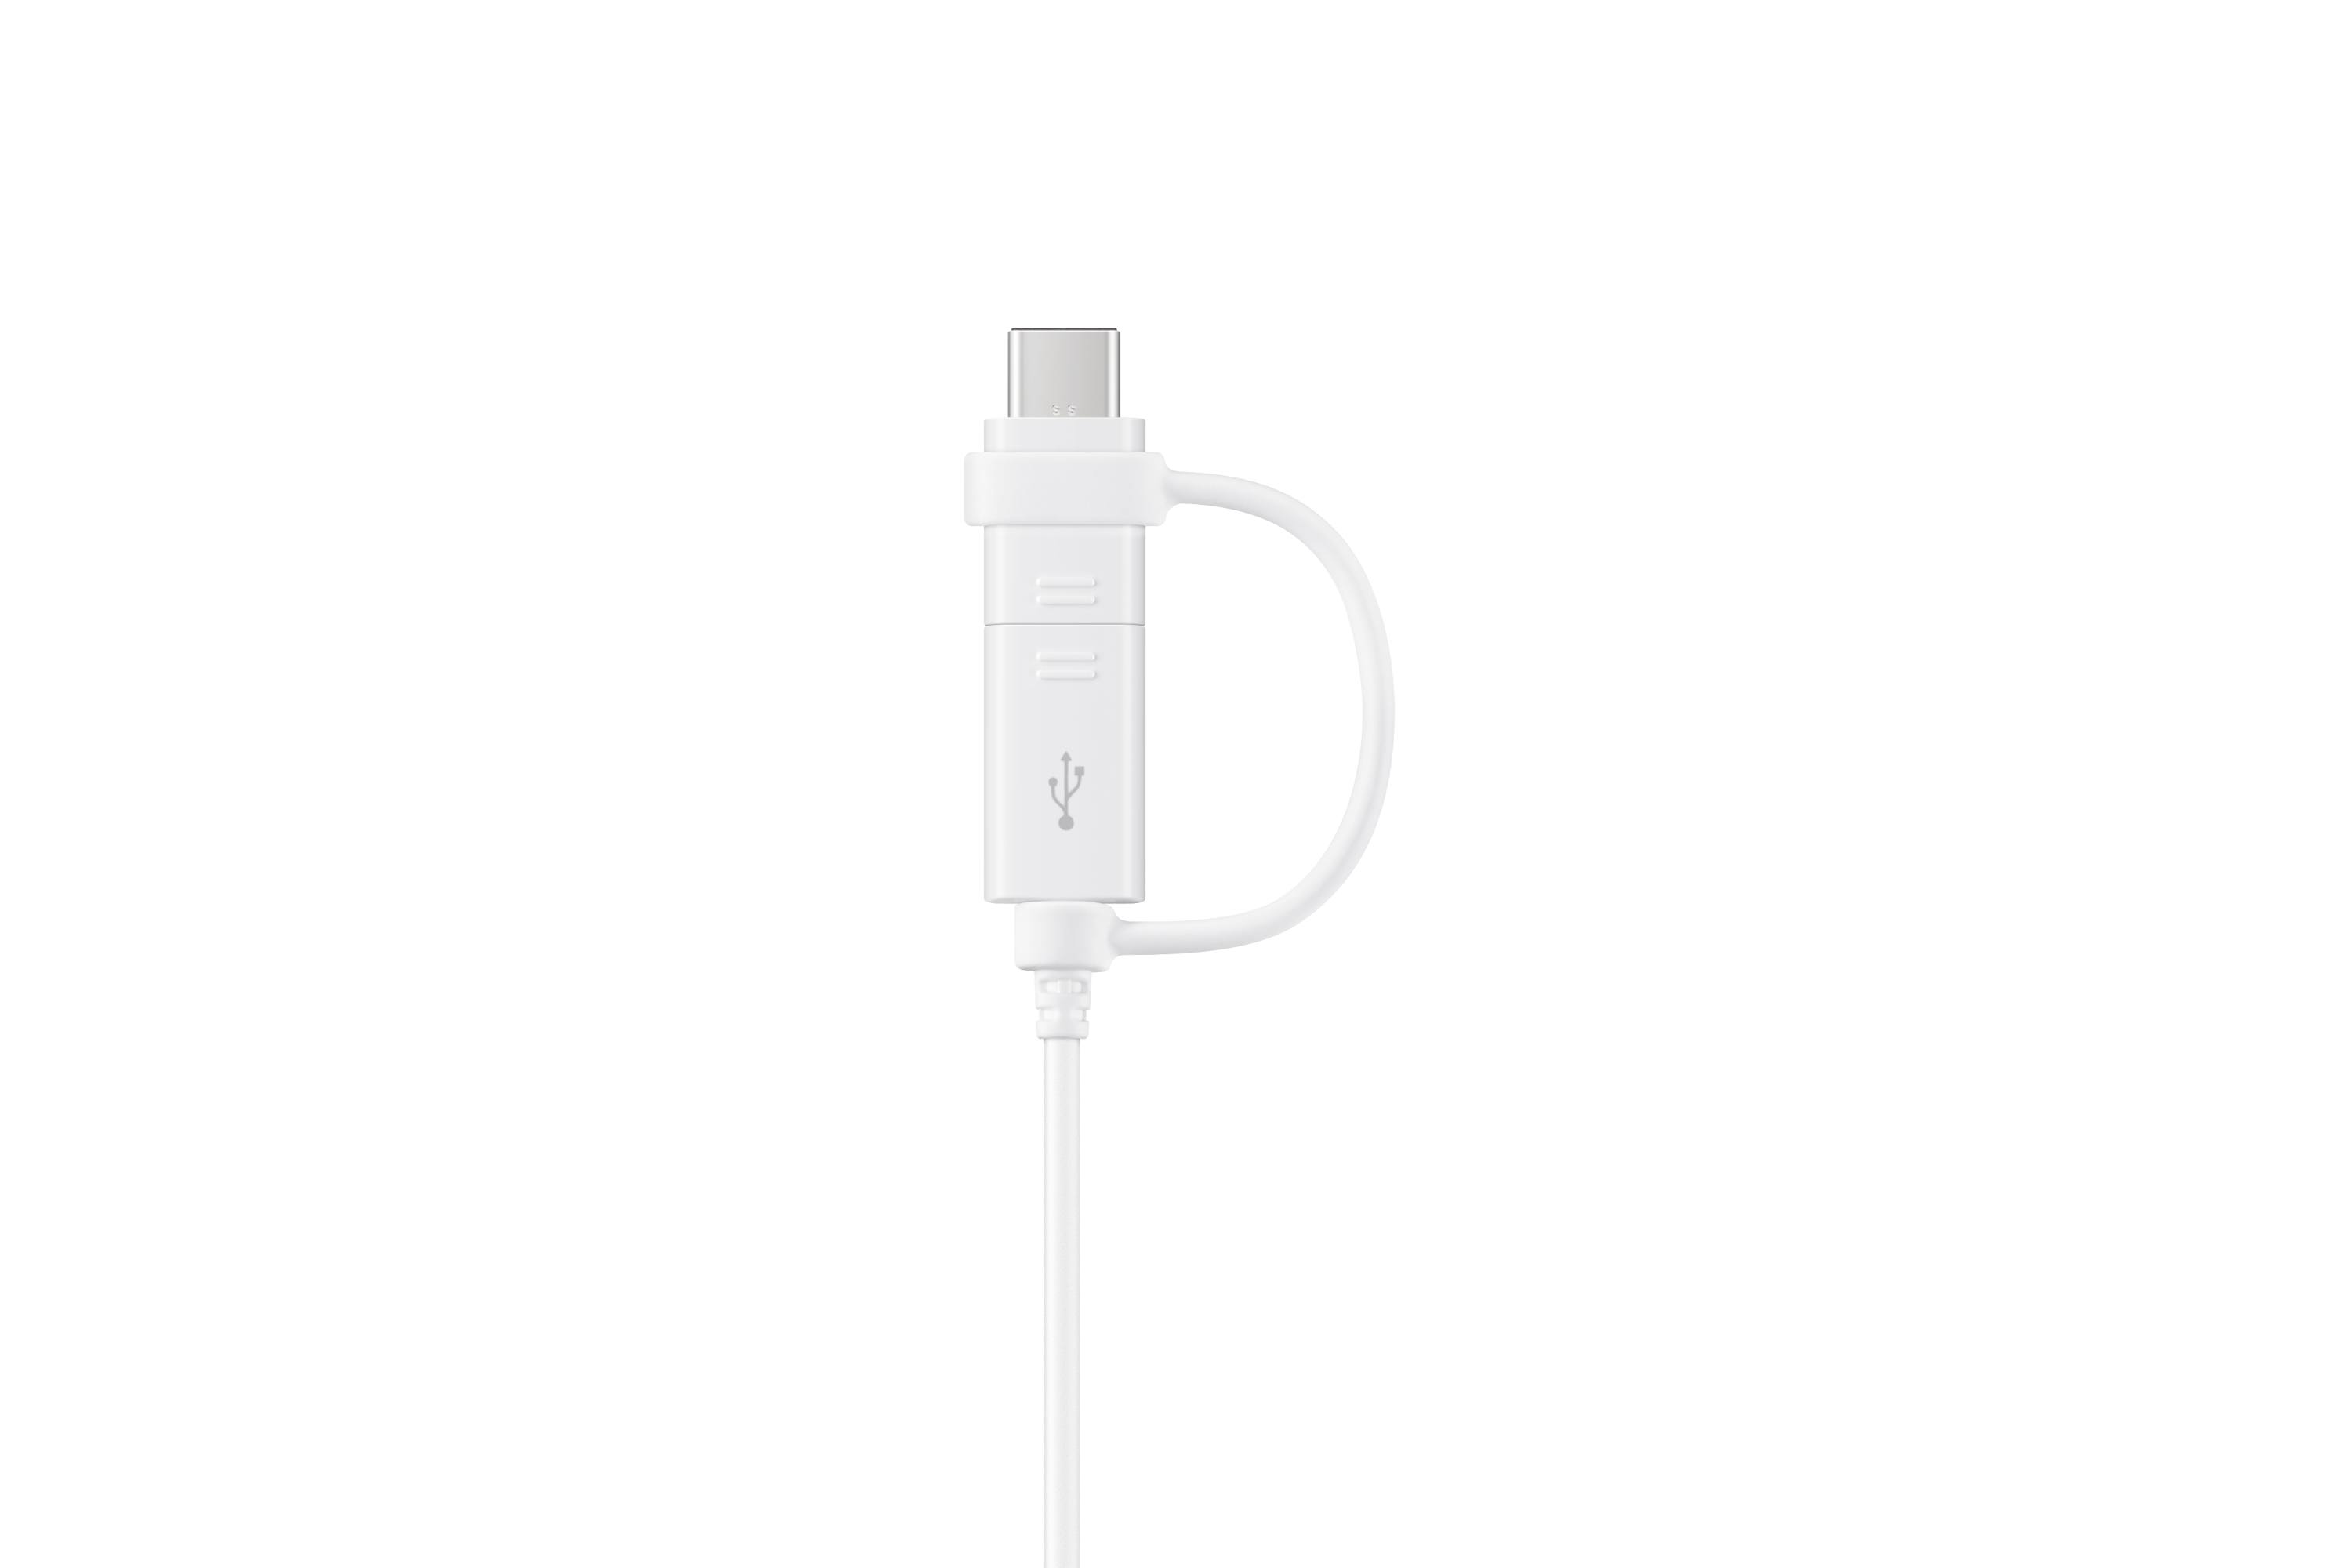 Samsung Data Cable Combo (USB-Type C and Micro USB), White